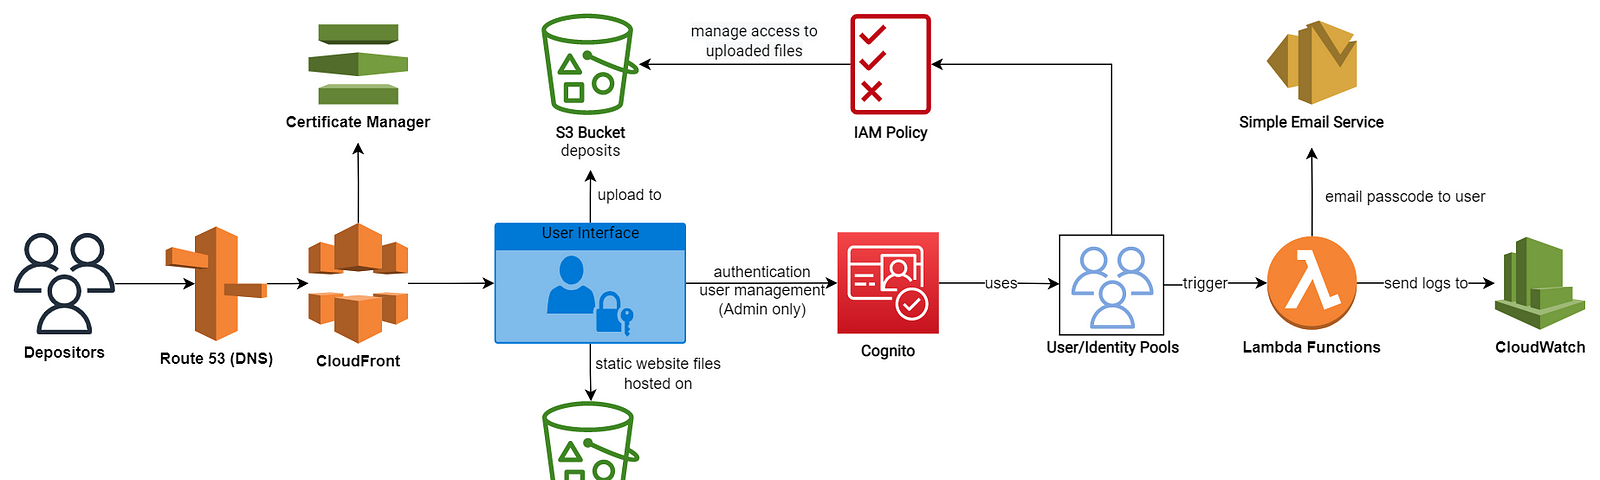 A diagram showing the architecture of the Deposit Service on the AWS cloud platform